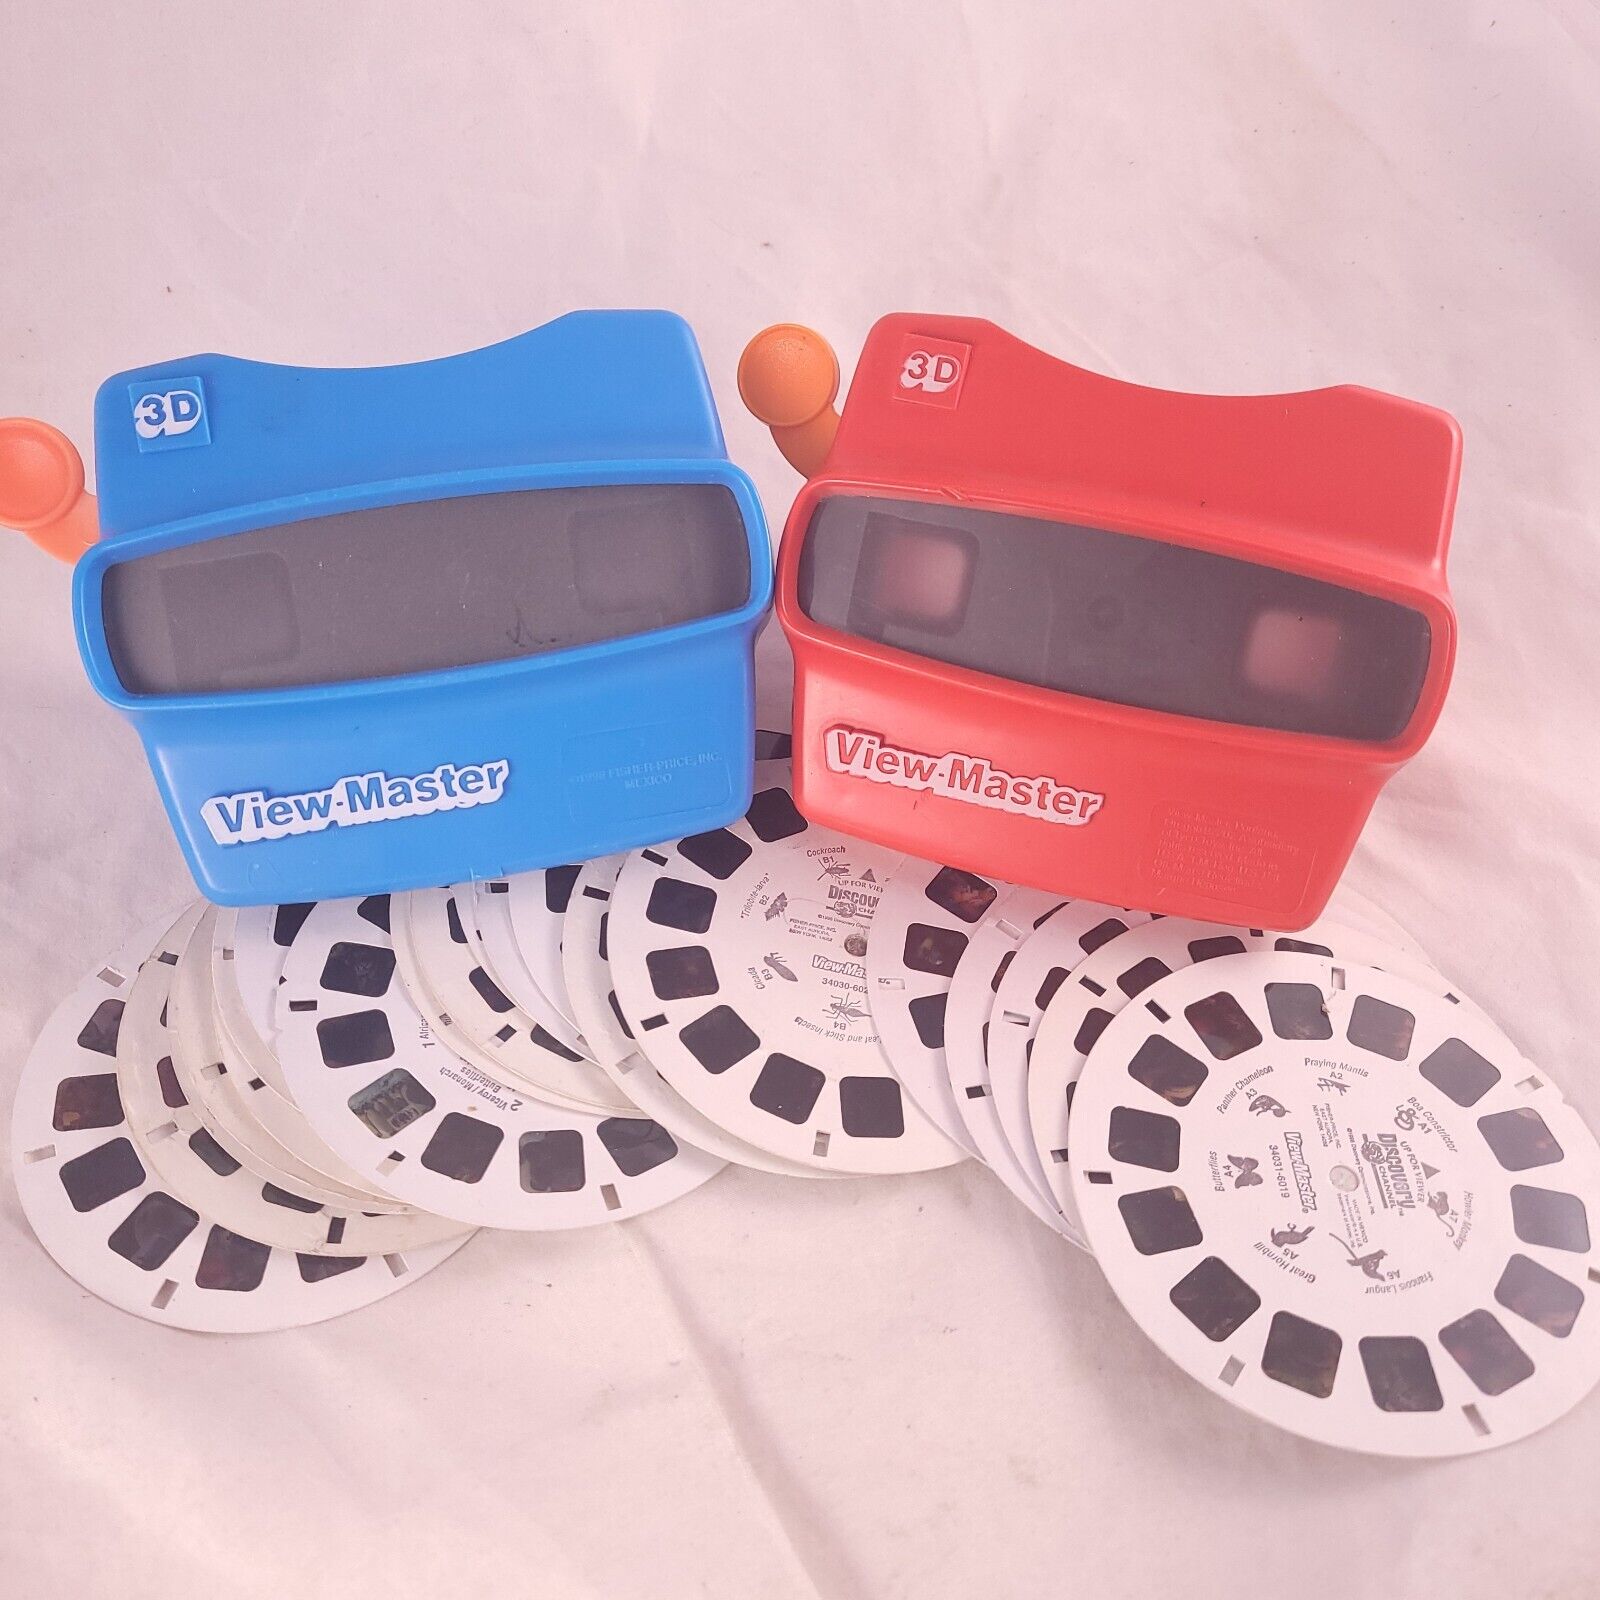 2 ViewMaster 3D + Lot Of 22 Children\'s Reels Disney Discovery Batman View Master